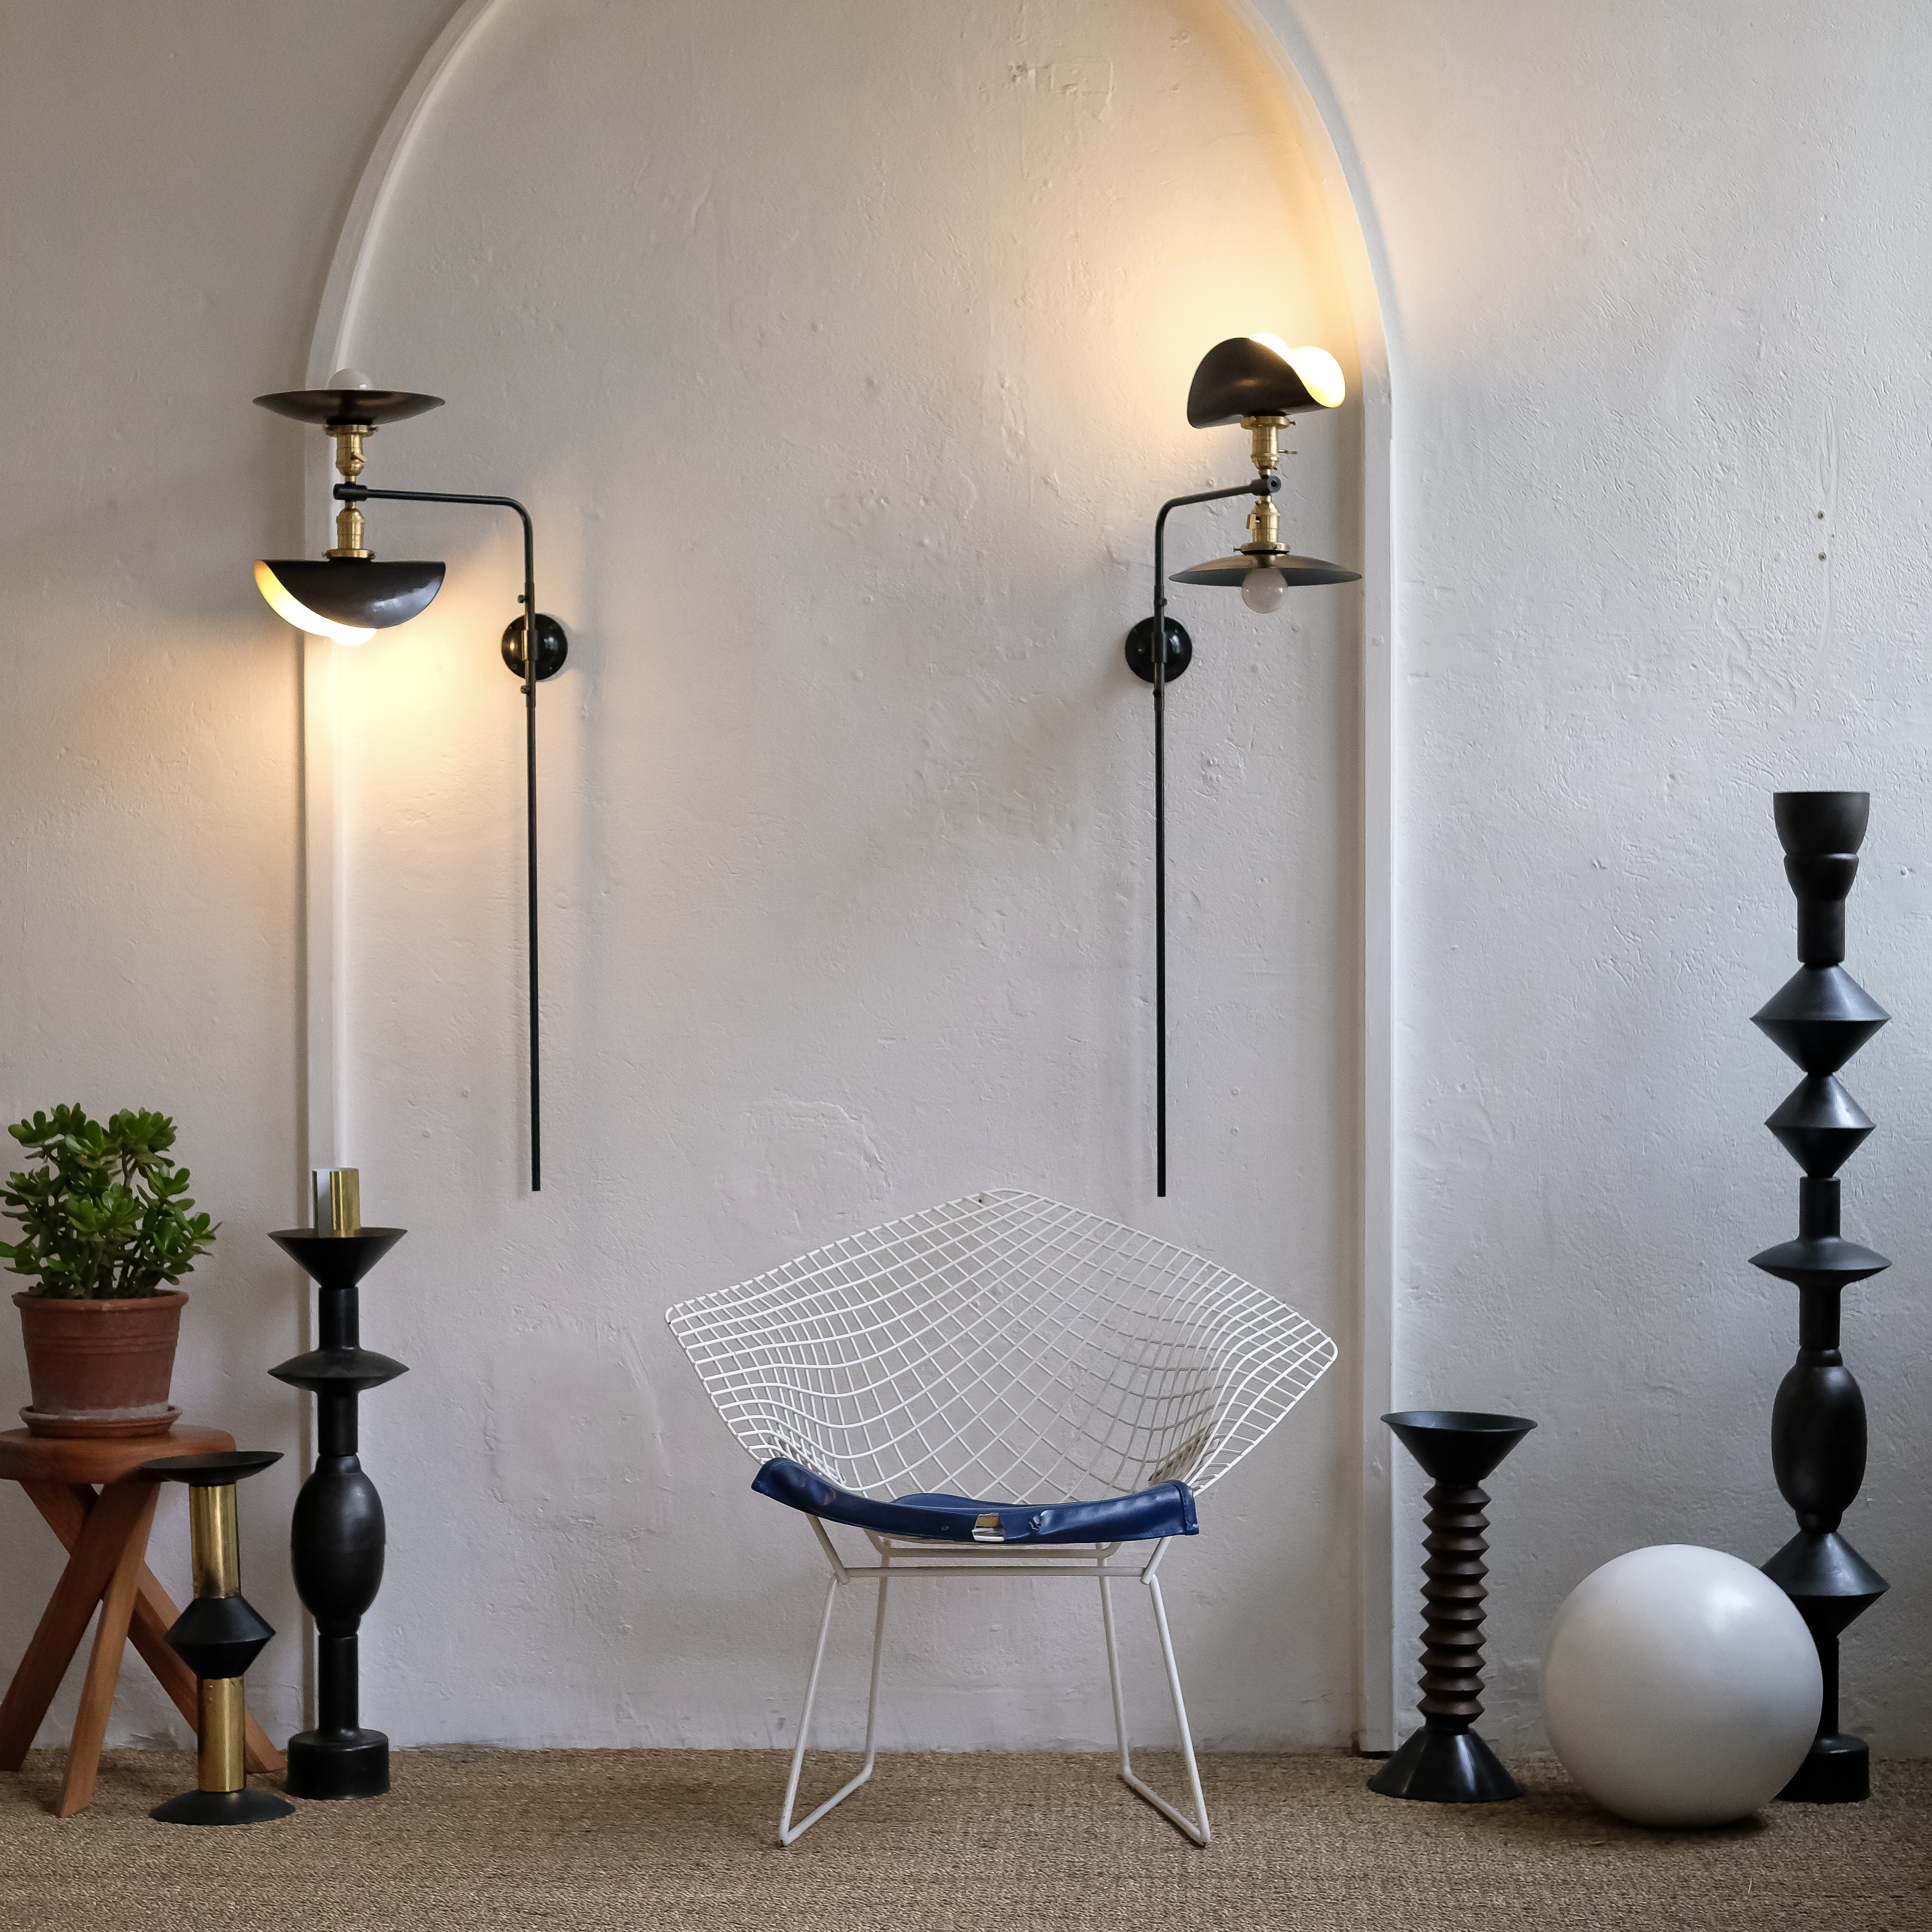 Double Wall light French lighting design